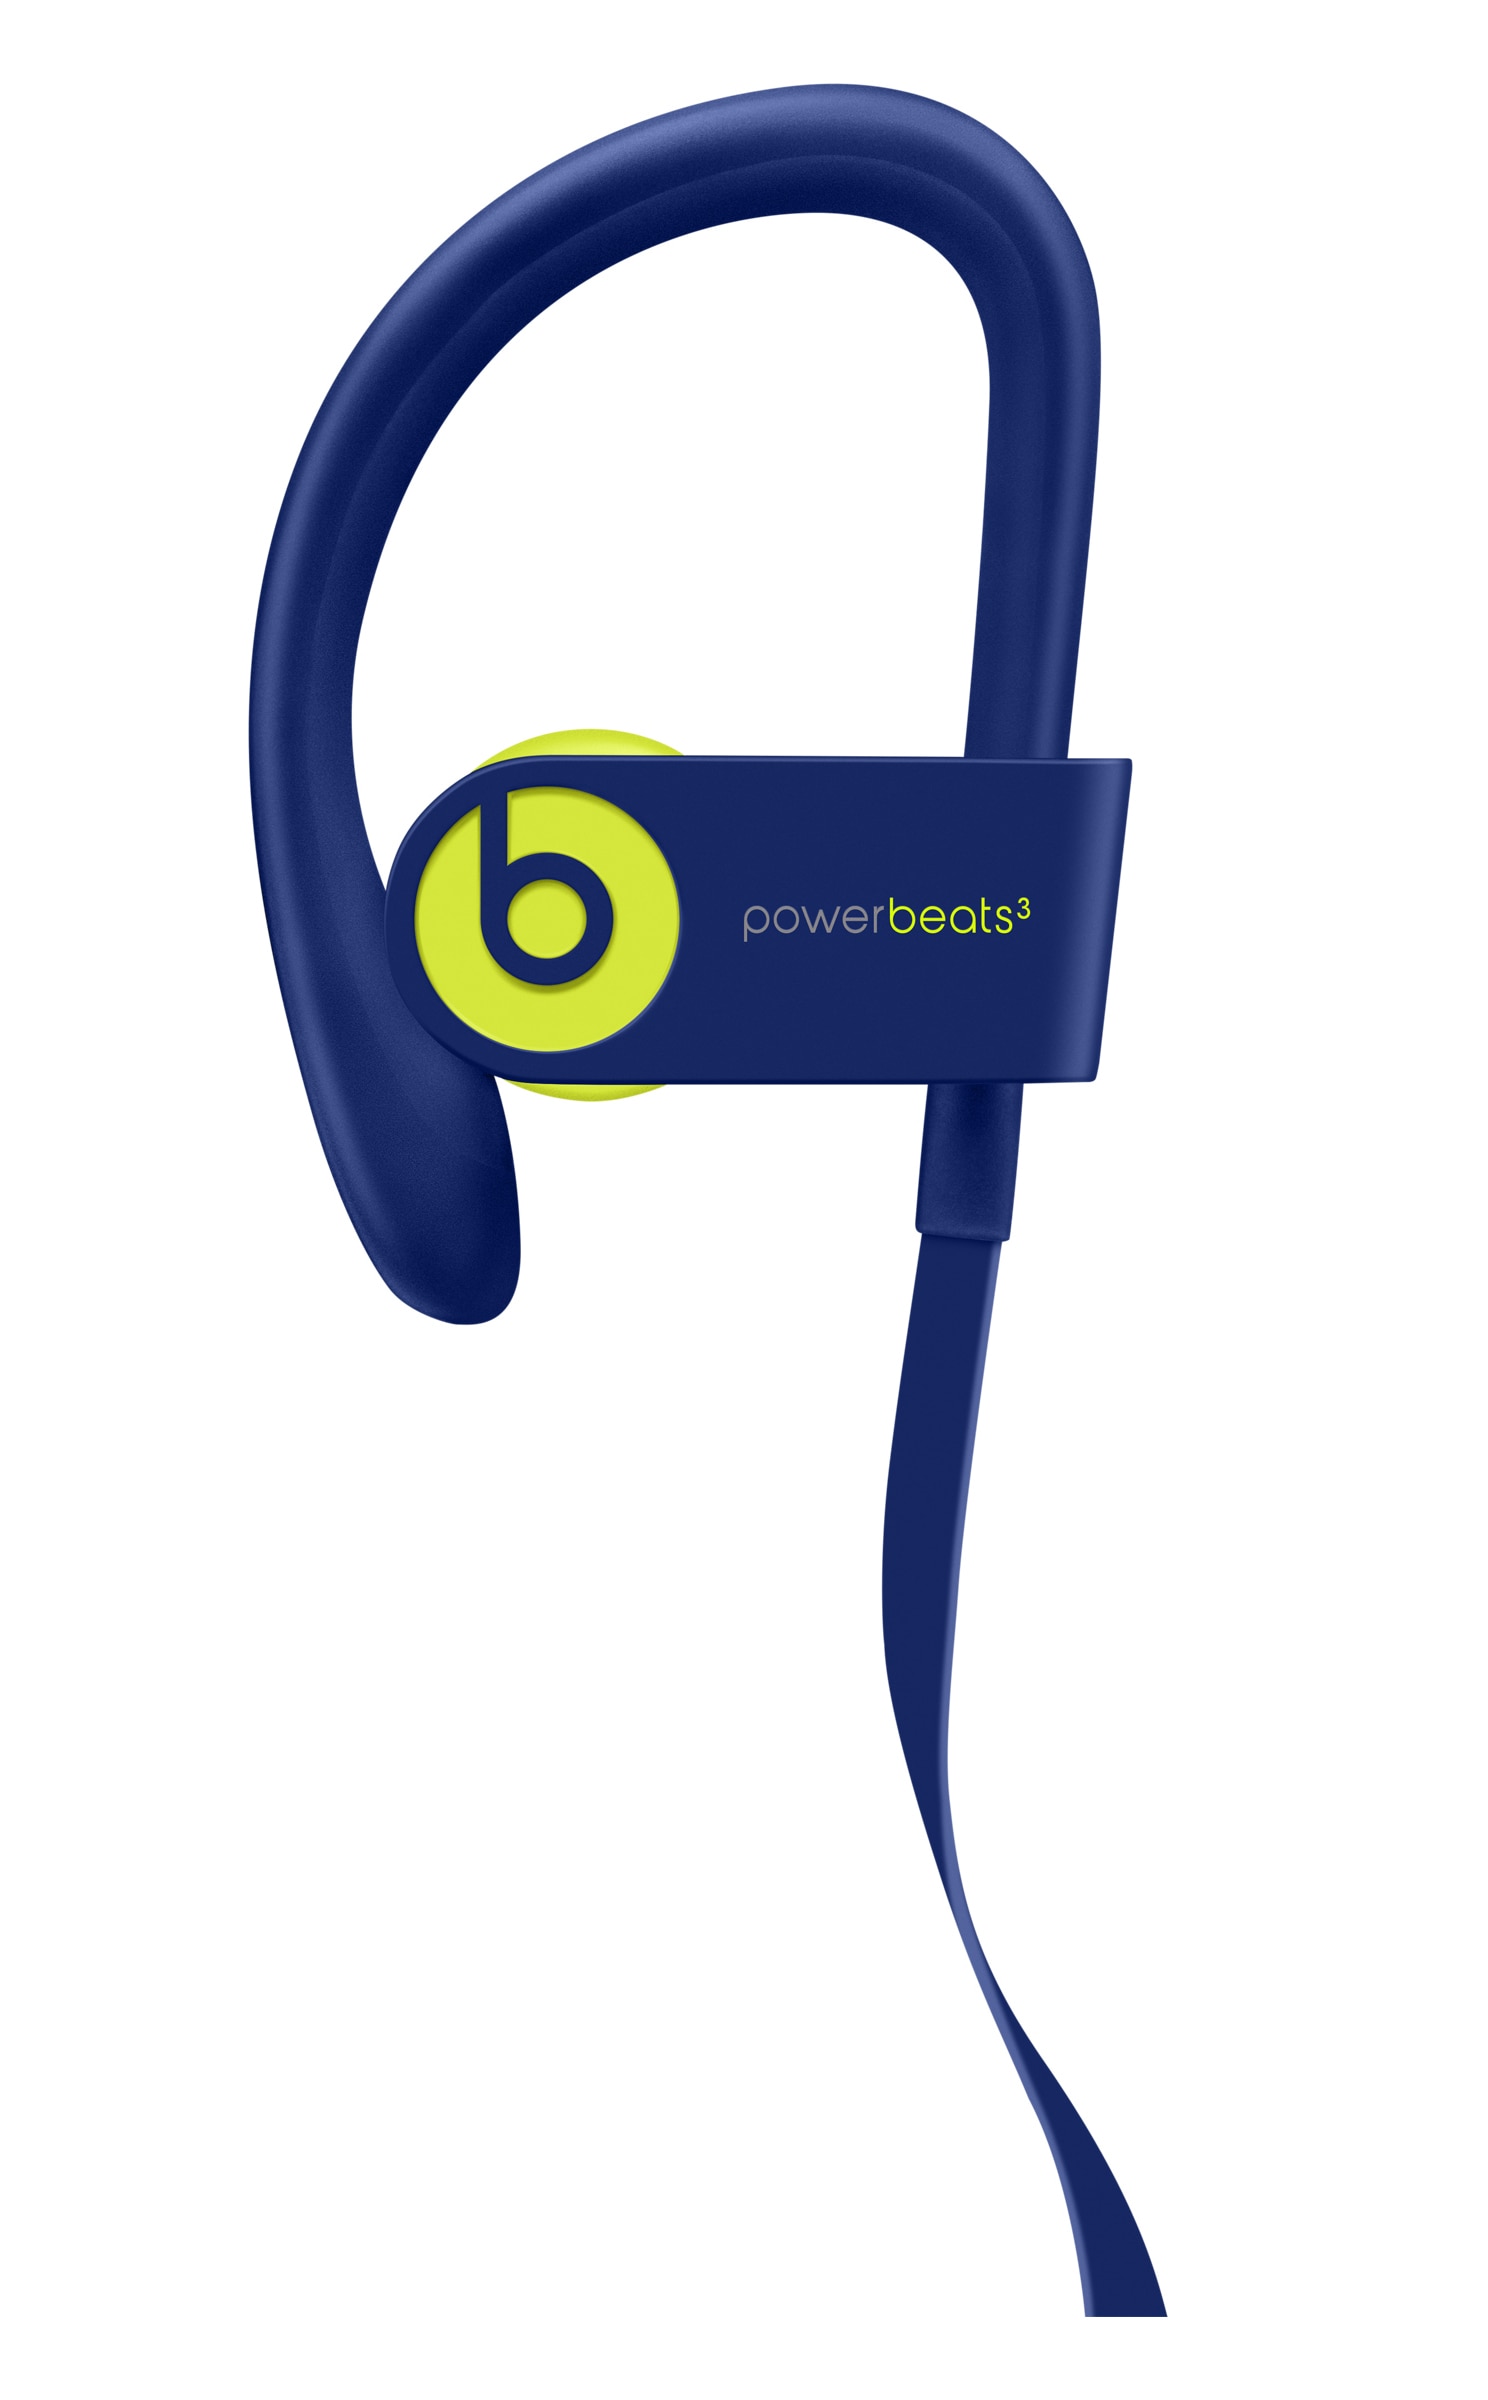 how to store powerbeats3 in case